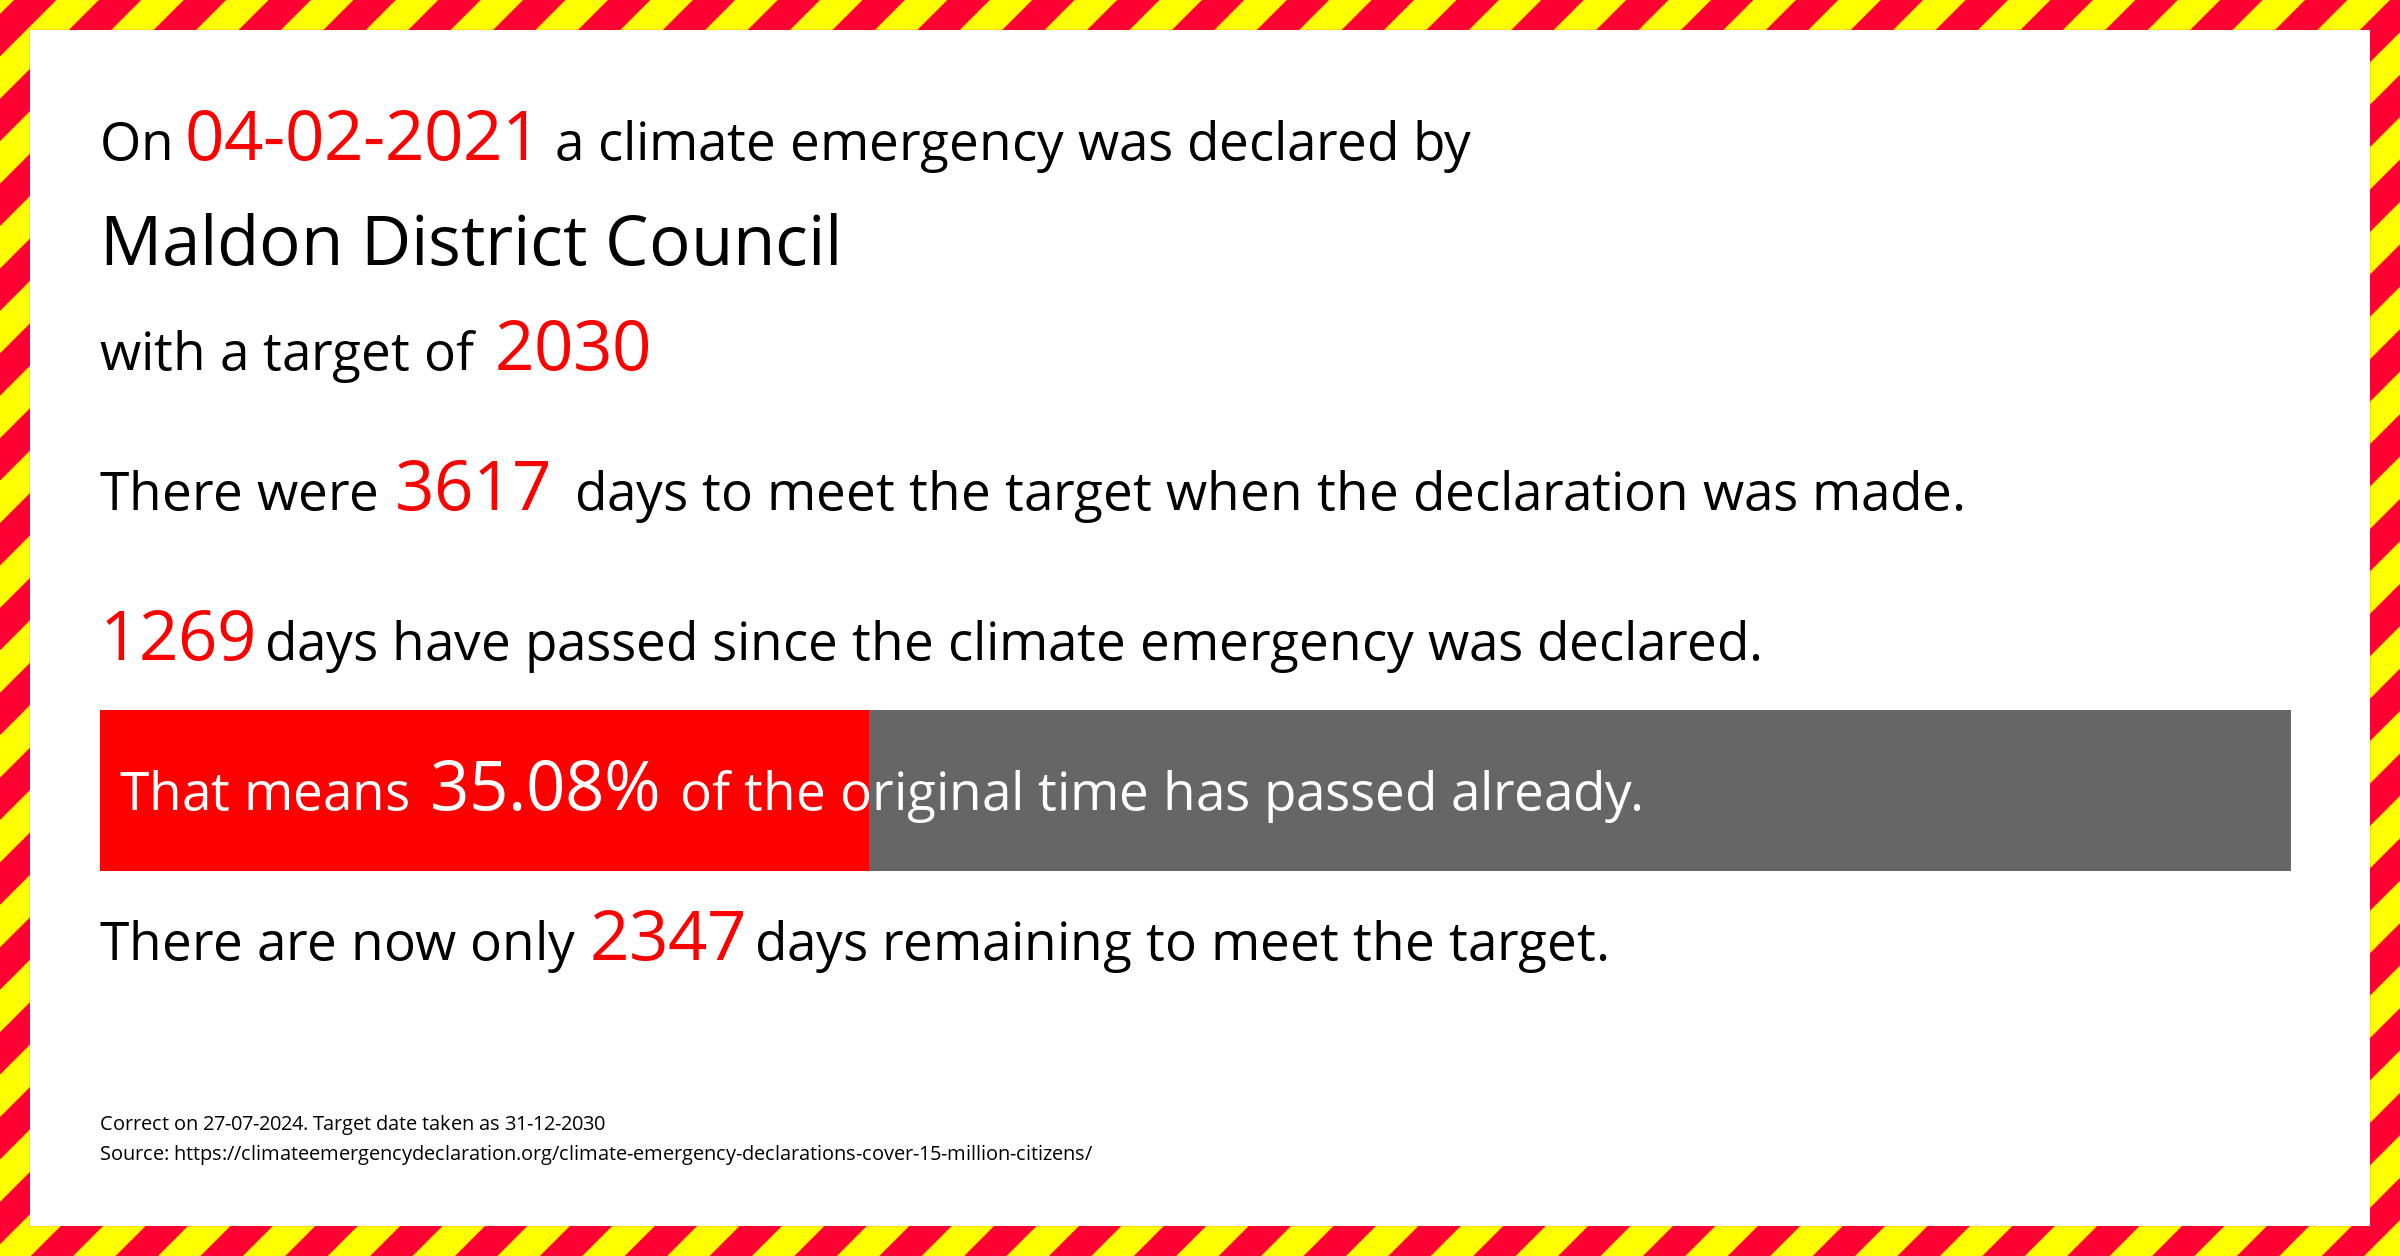 Maldon District Council  declared a Climate emergency on Thursday 4th February 2021, with a target of 2030.